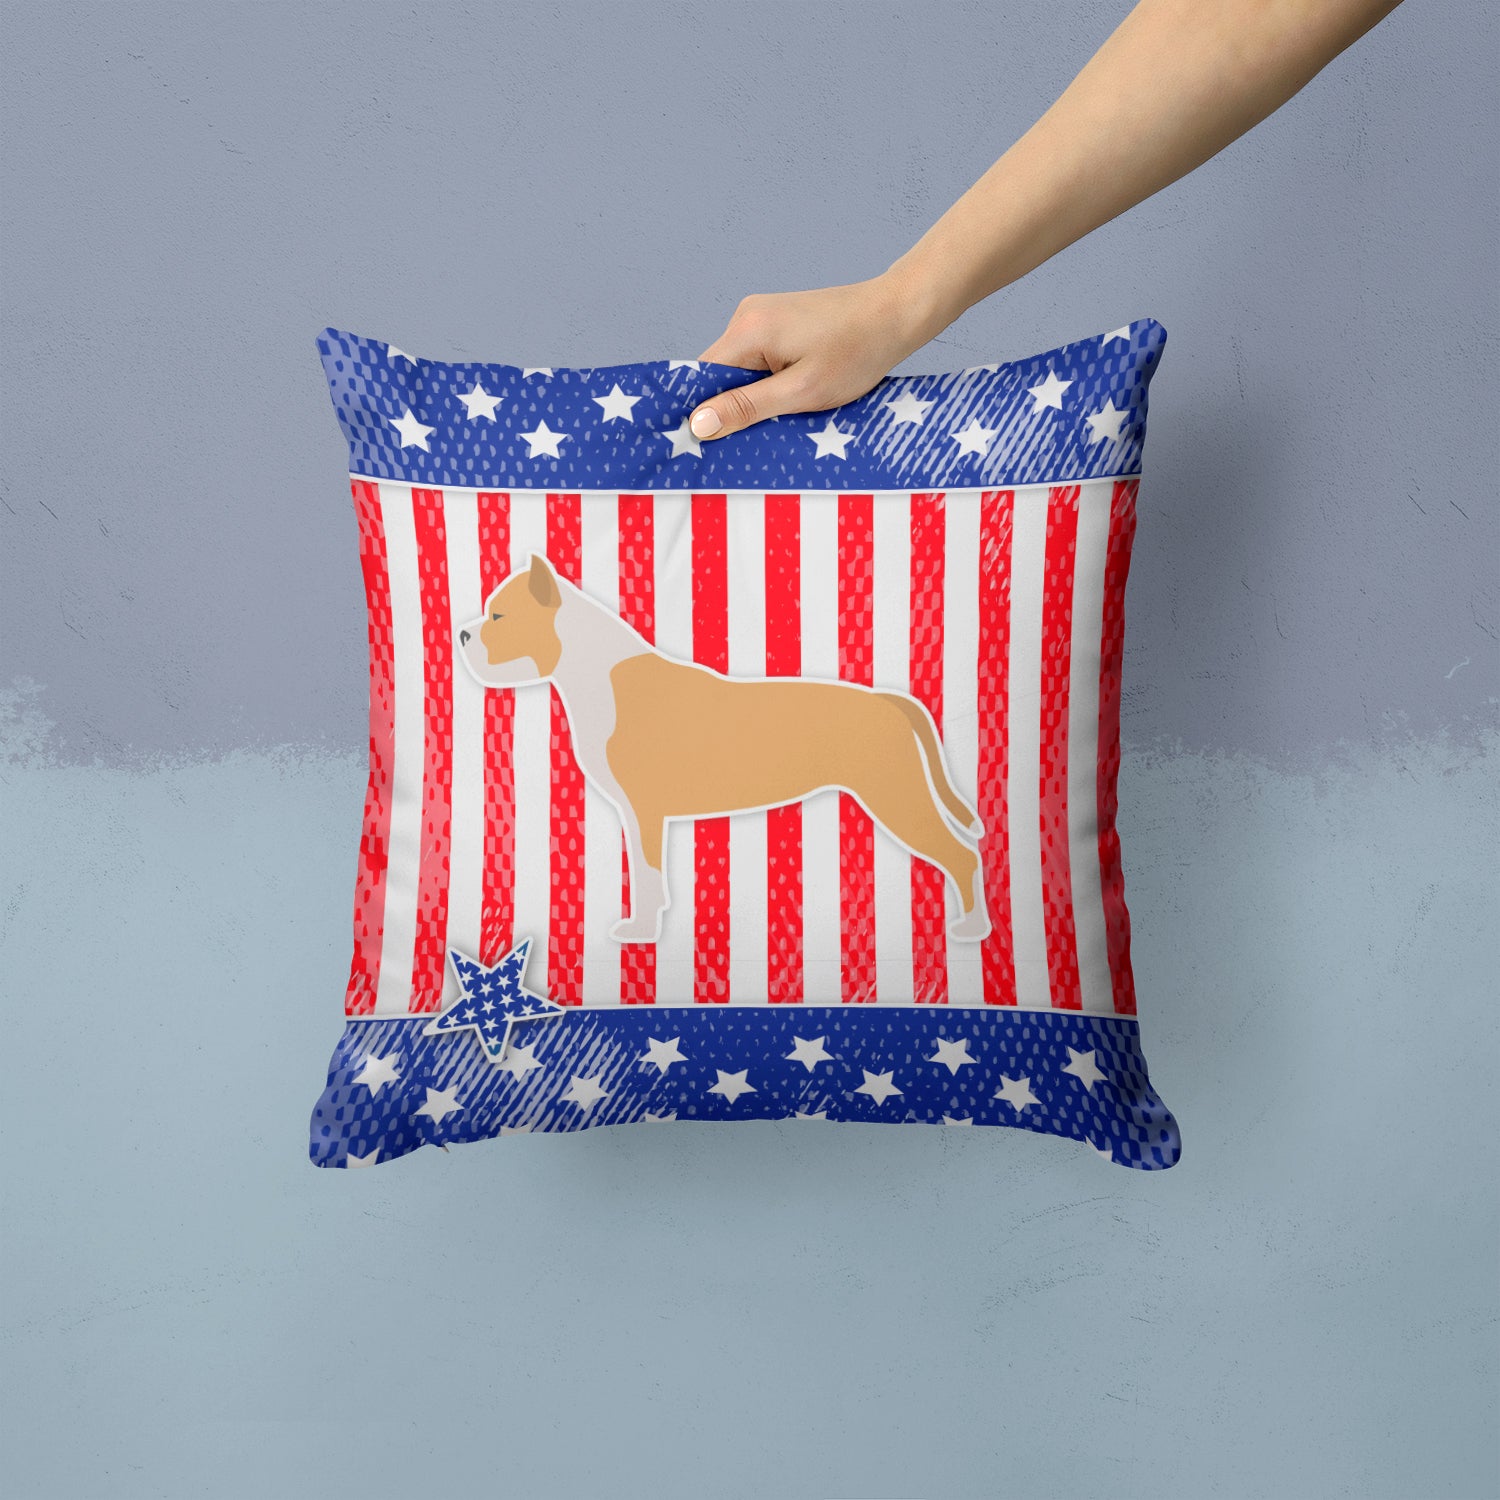 USA Patriotic Staffordshire Bull Terrier Fabric Decorative Pillow BB3354PW1414 - the-store.com